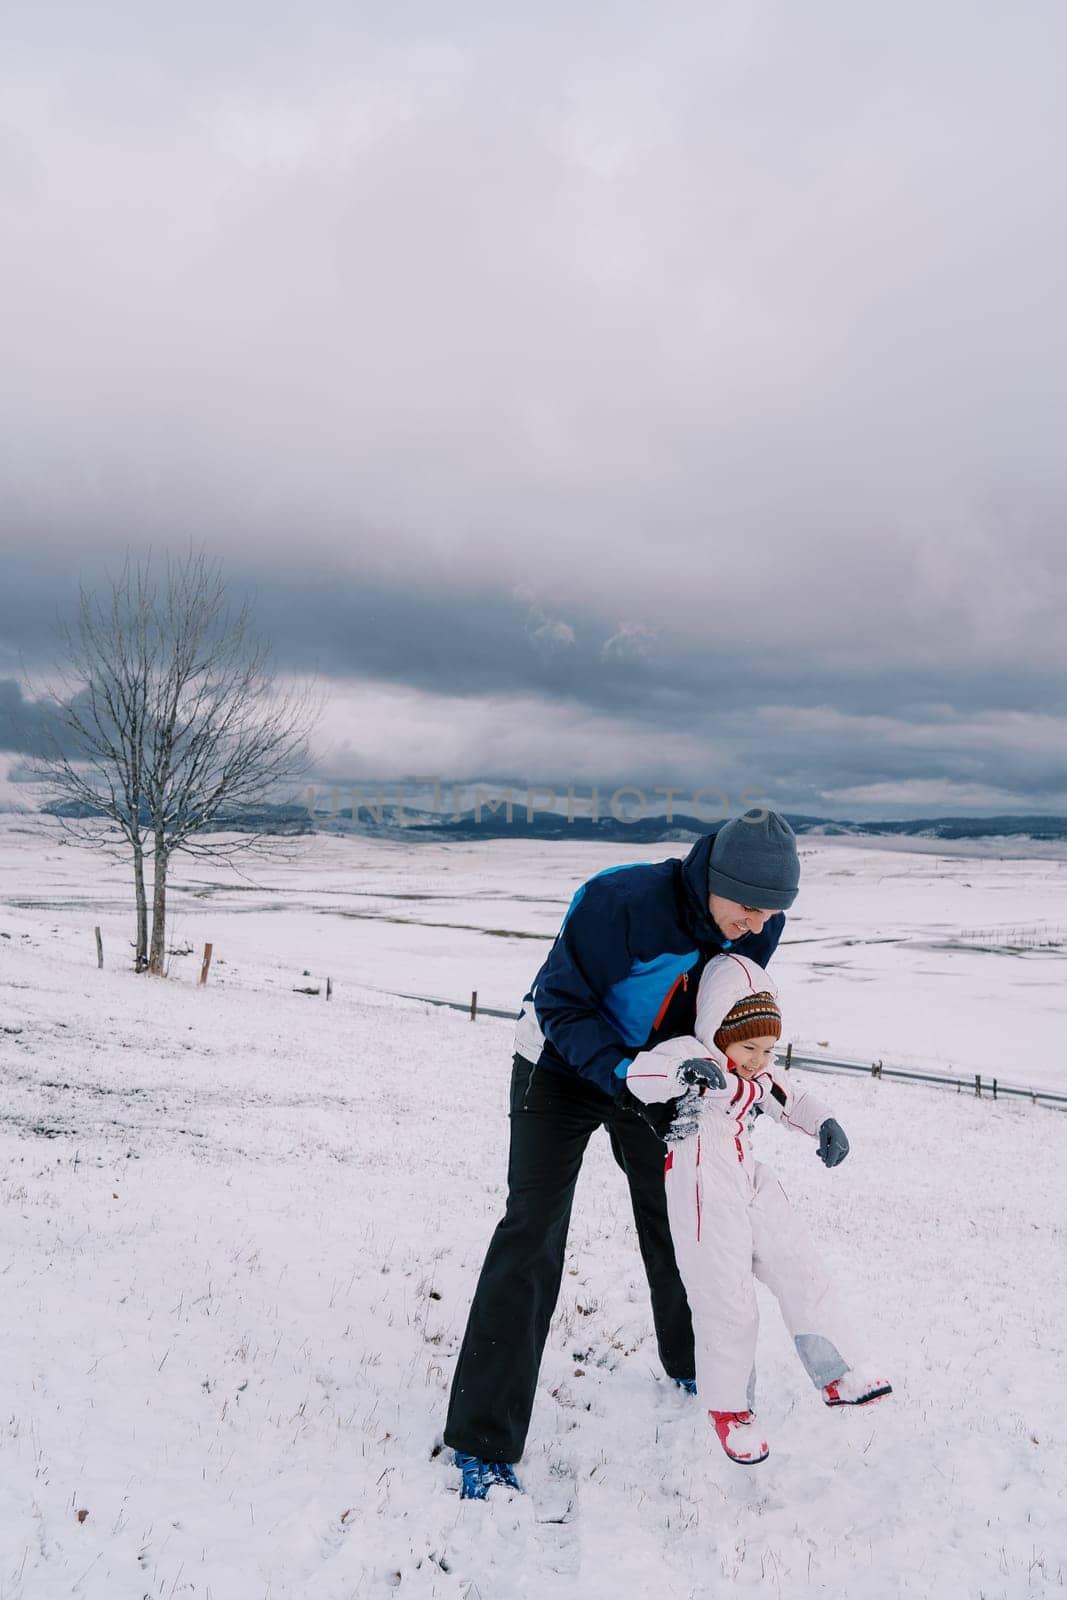 Dad lifts a laughing little girl while standing on a snowy slope. High quality photo